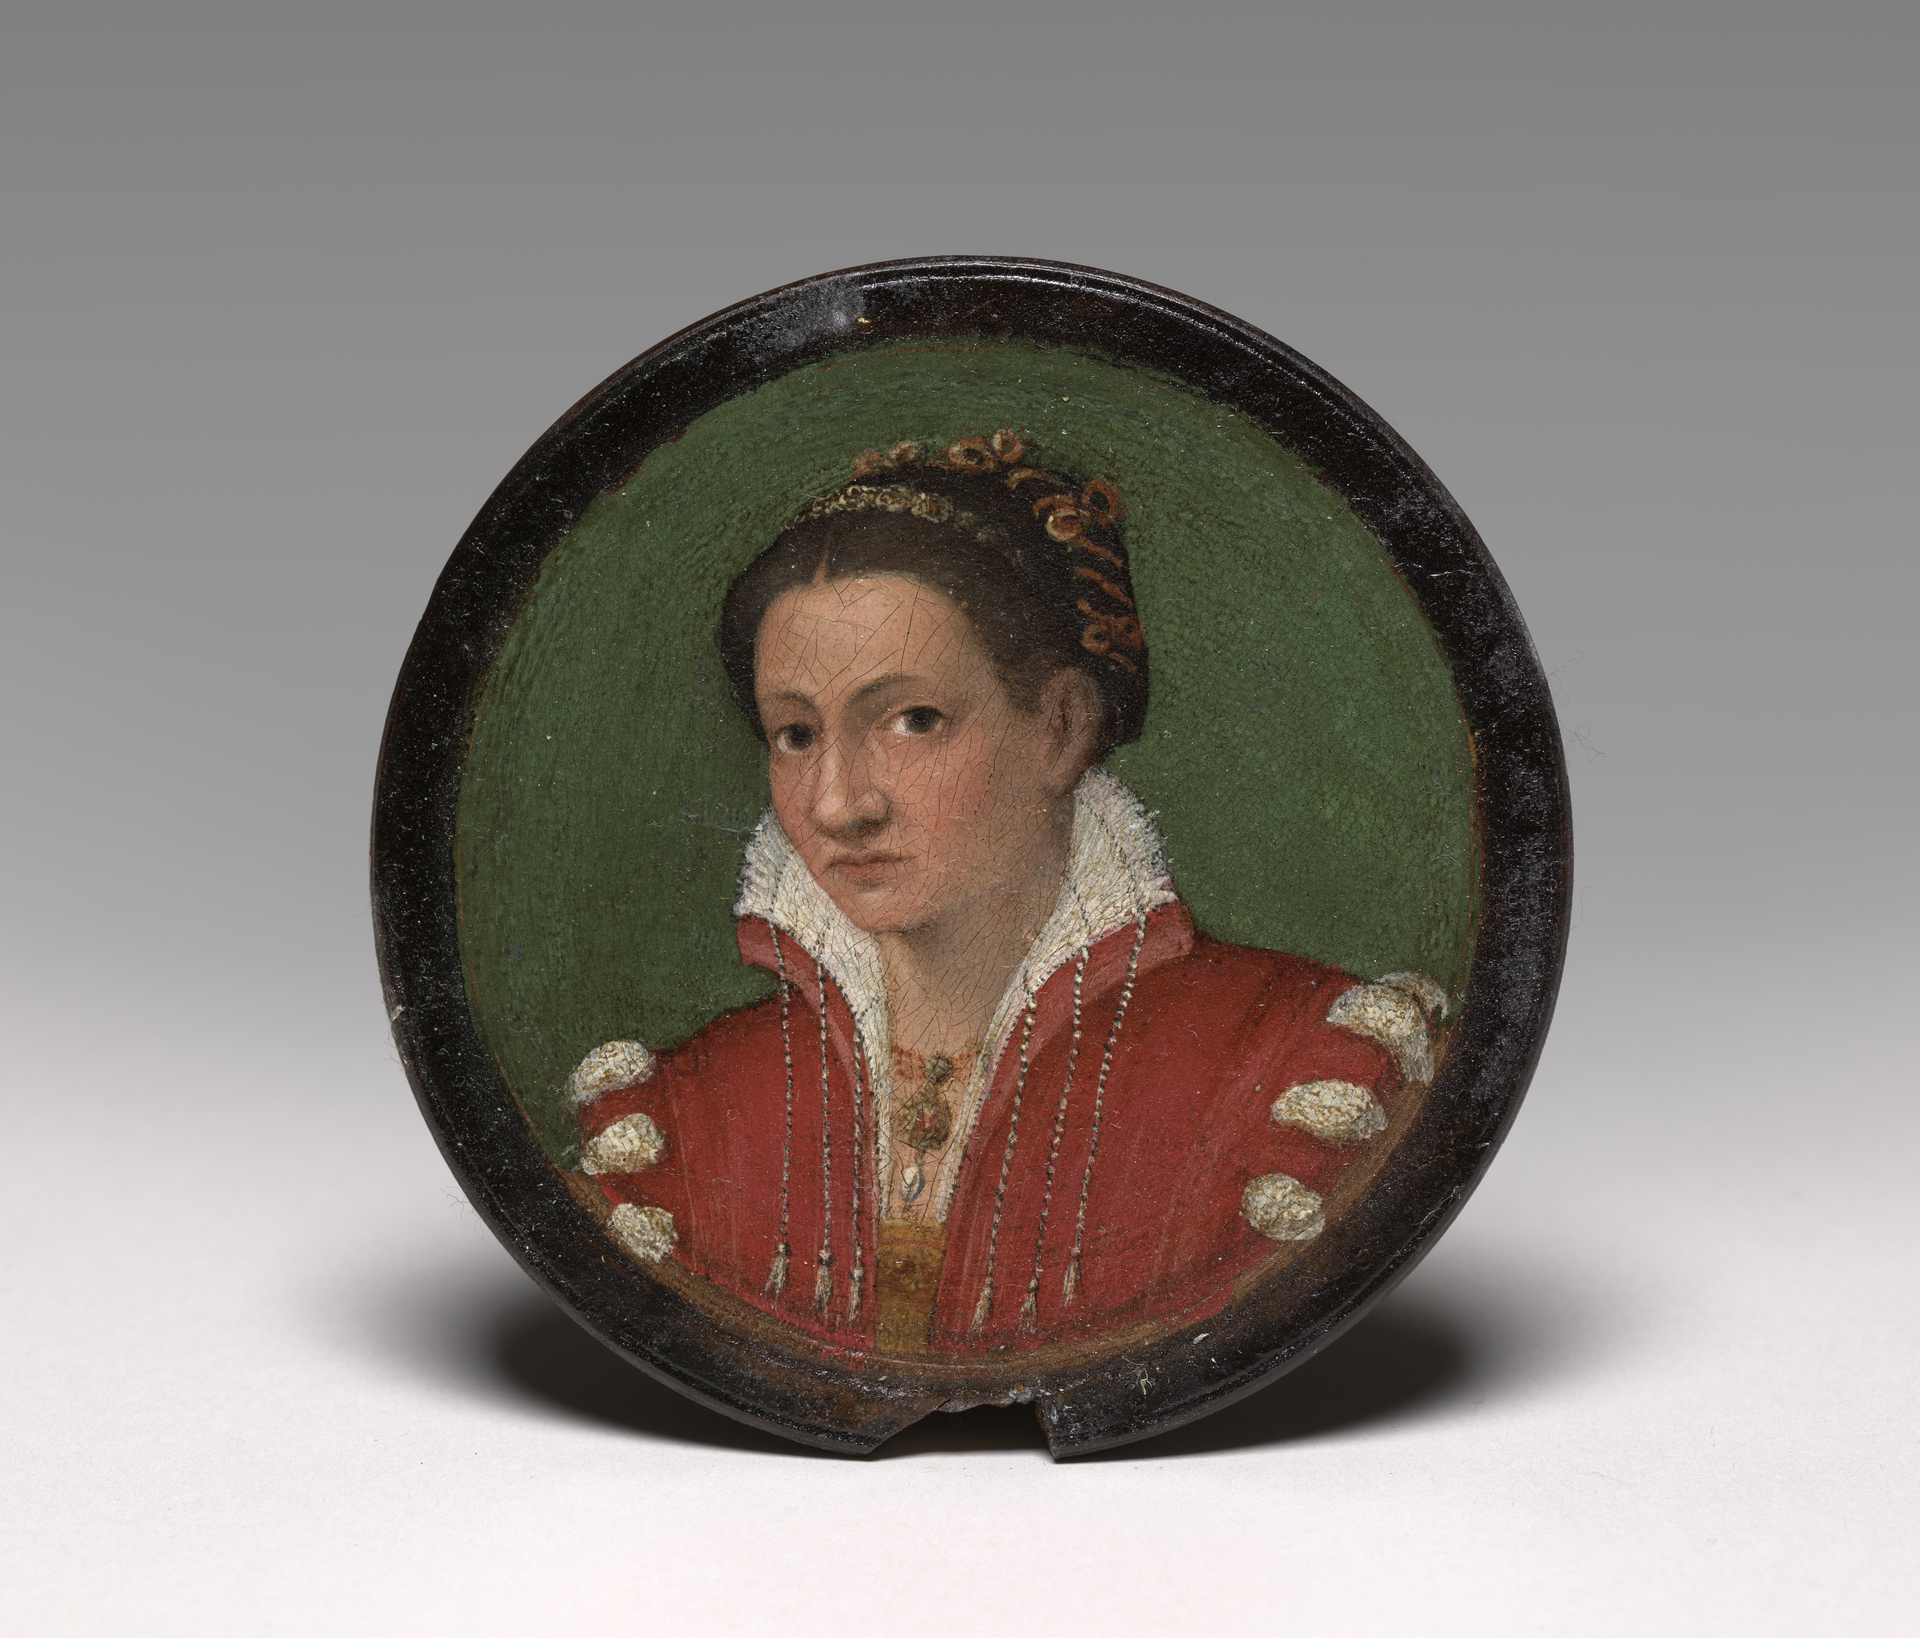 Portrait of a woman in a circular framed panel with dark hair in a bun and a red dress with ivory colored collar